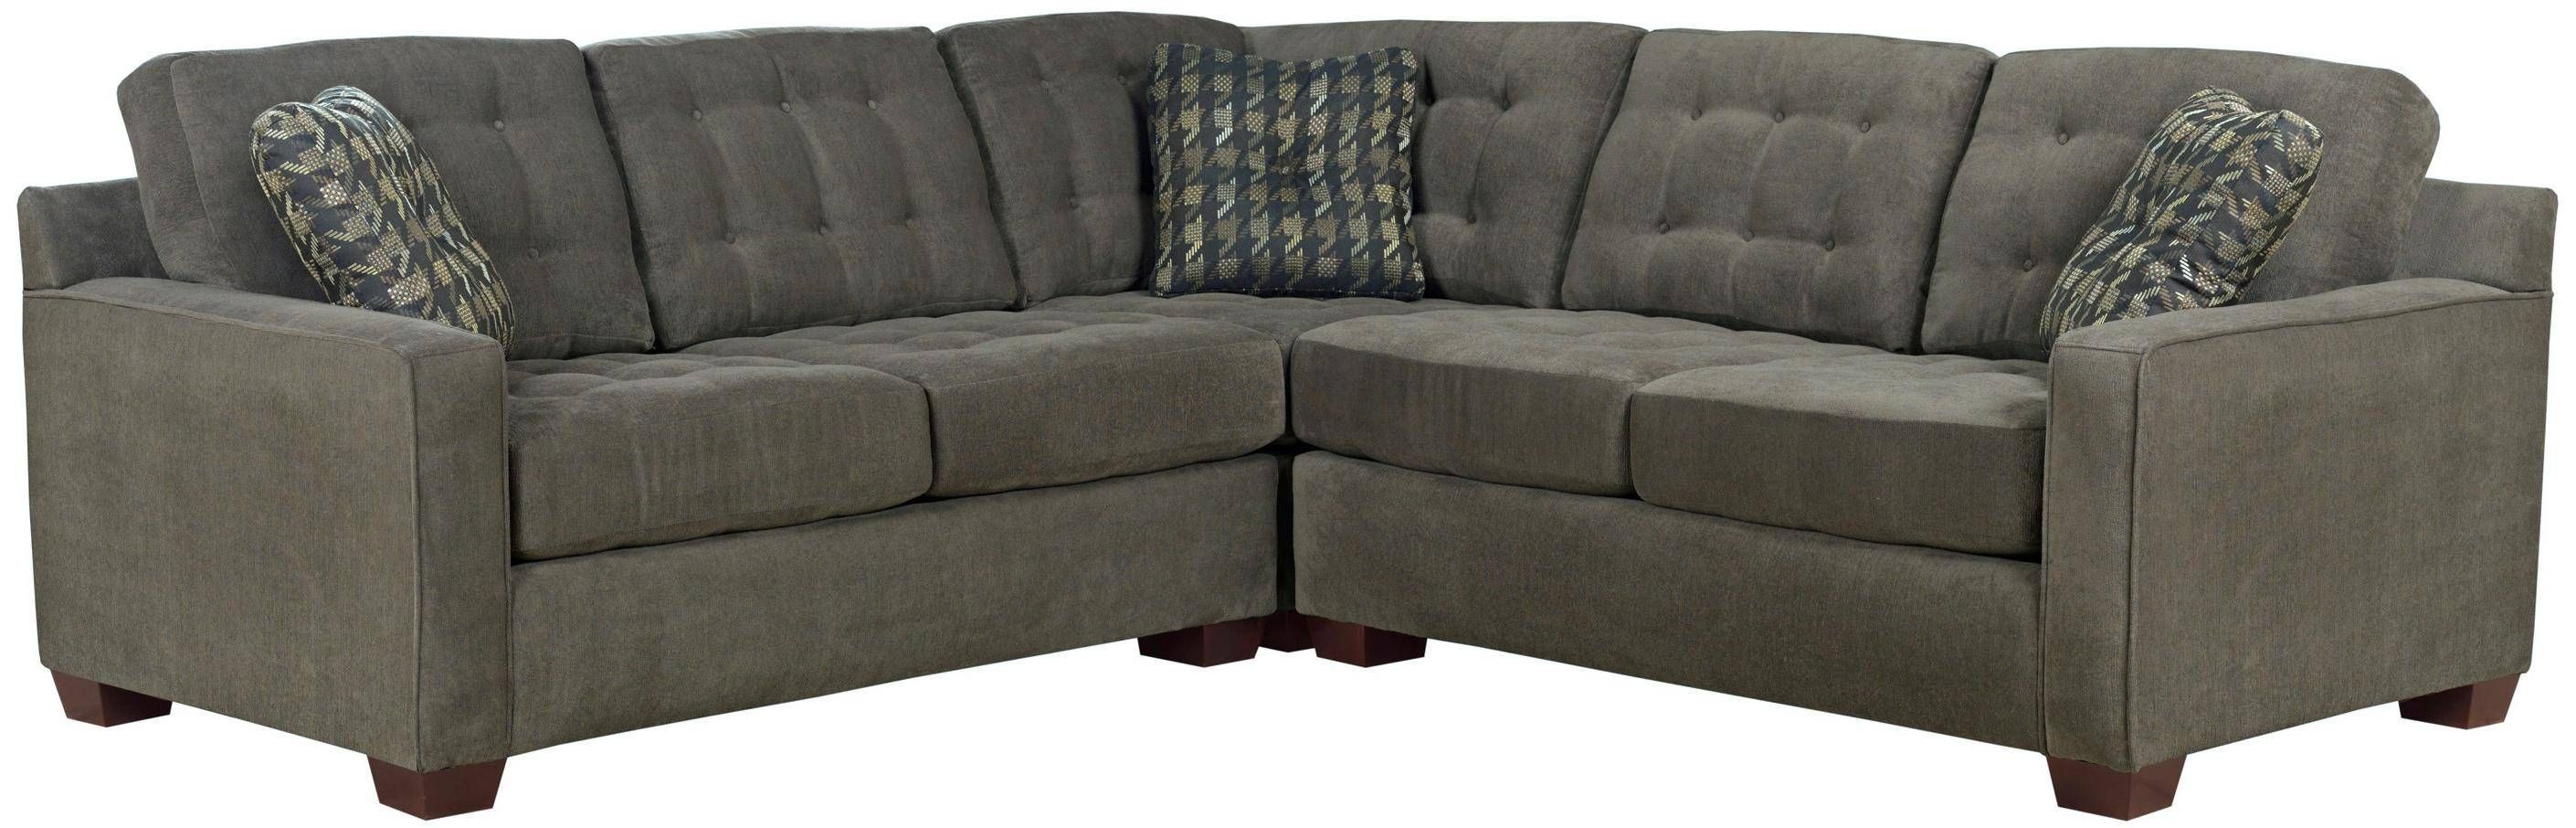 Broyhill Furniture Tribeca Contemporary L Shaped Sectional Sofa Throughout Broyhill Sectional Sofa (Photo 9 of 30)